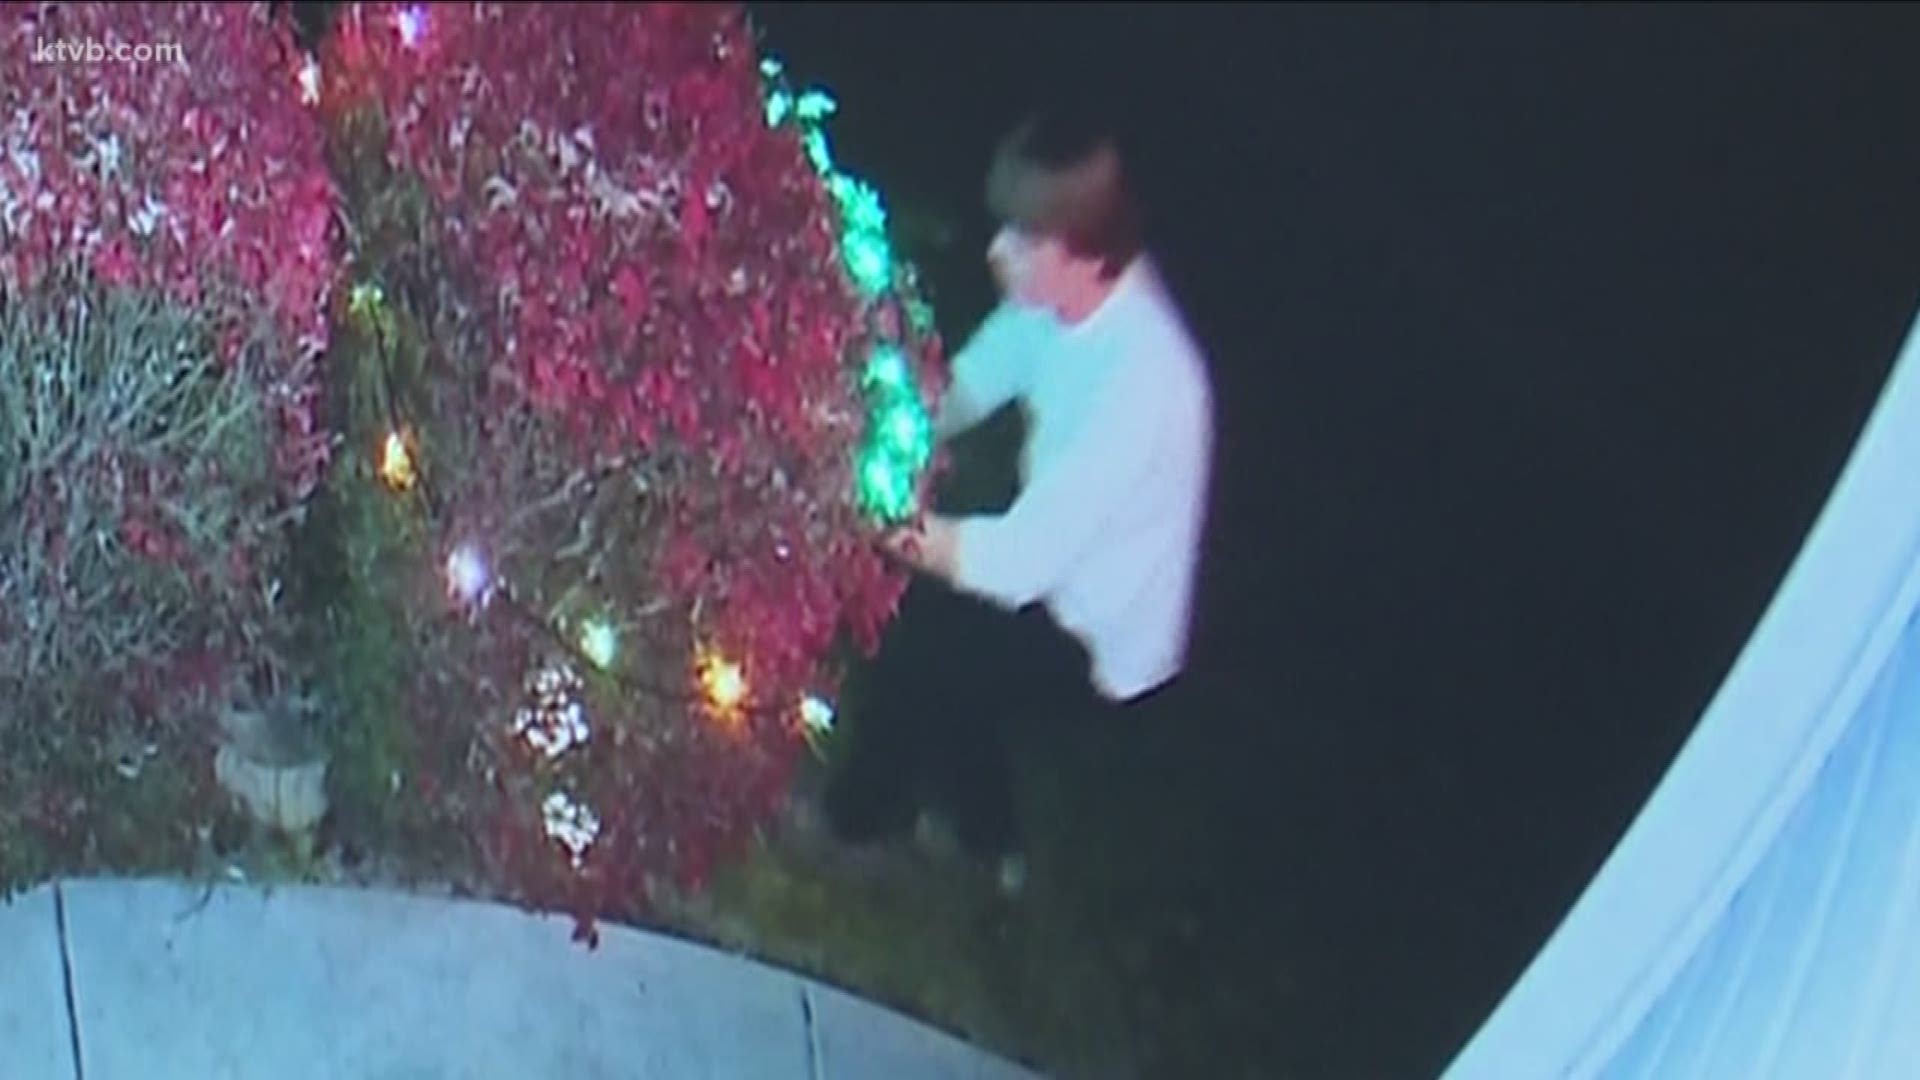 The person who vandalized the family's Halloween decorations was caught on camera.